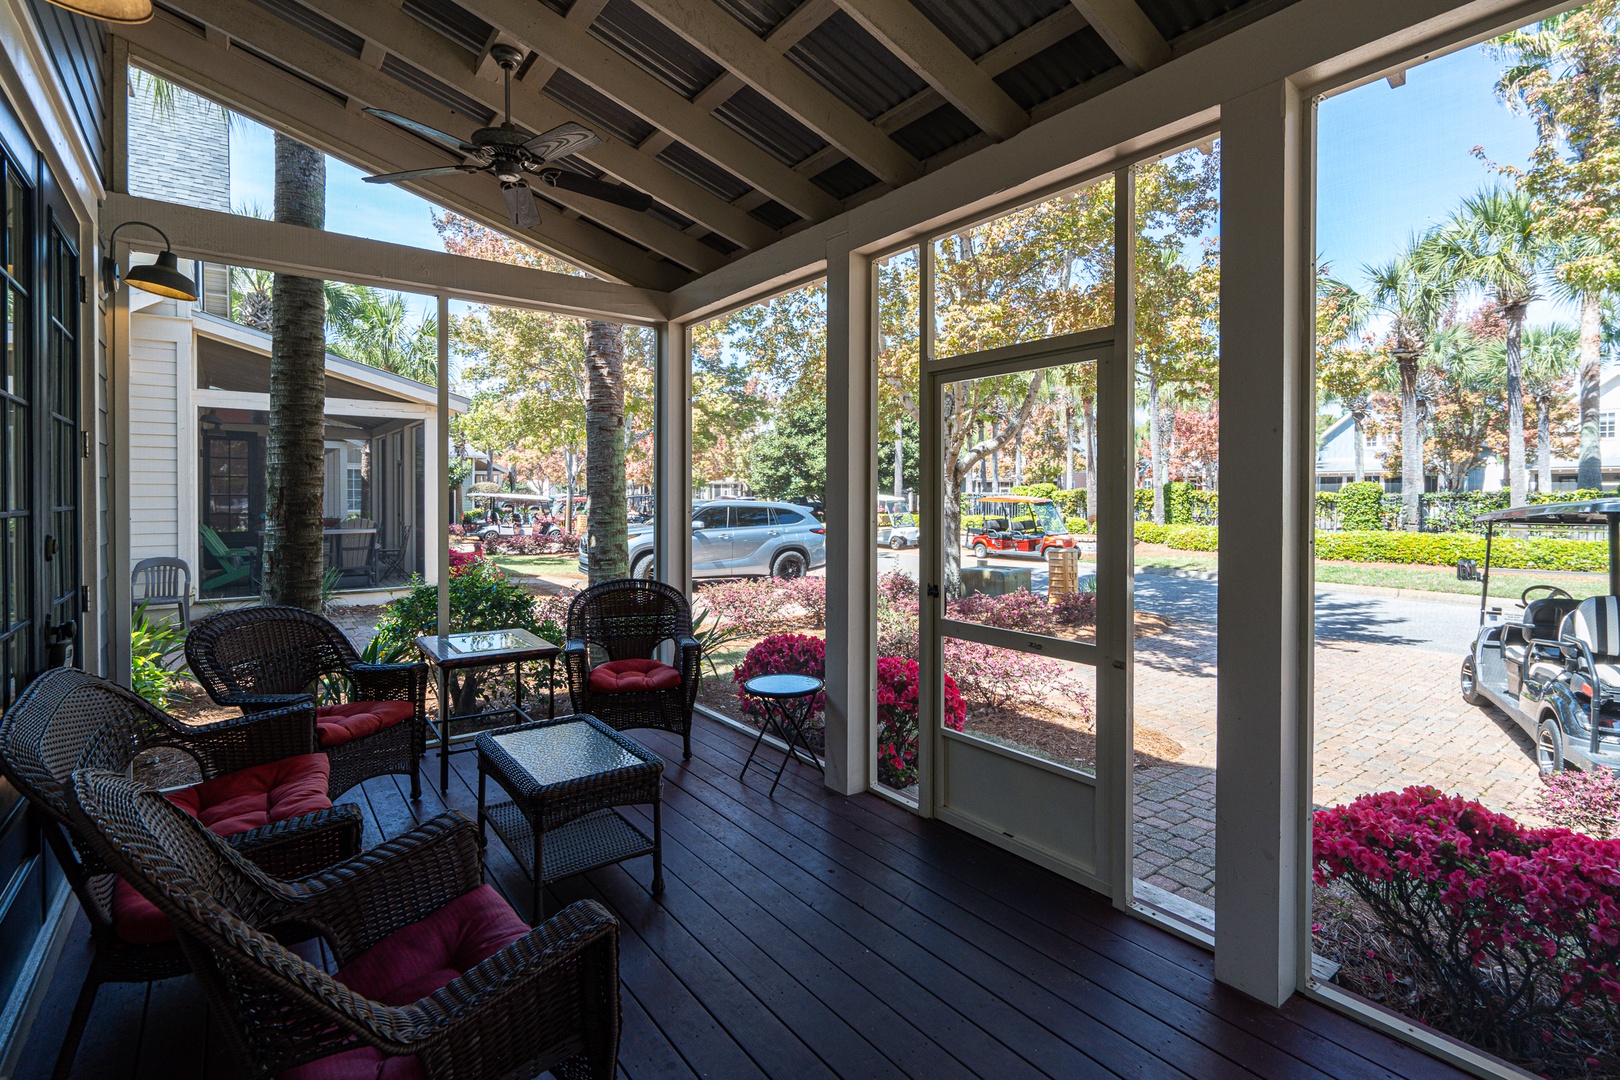 Sip morning coffee or enjoy an evening beverage on the screened porch